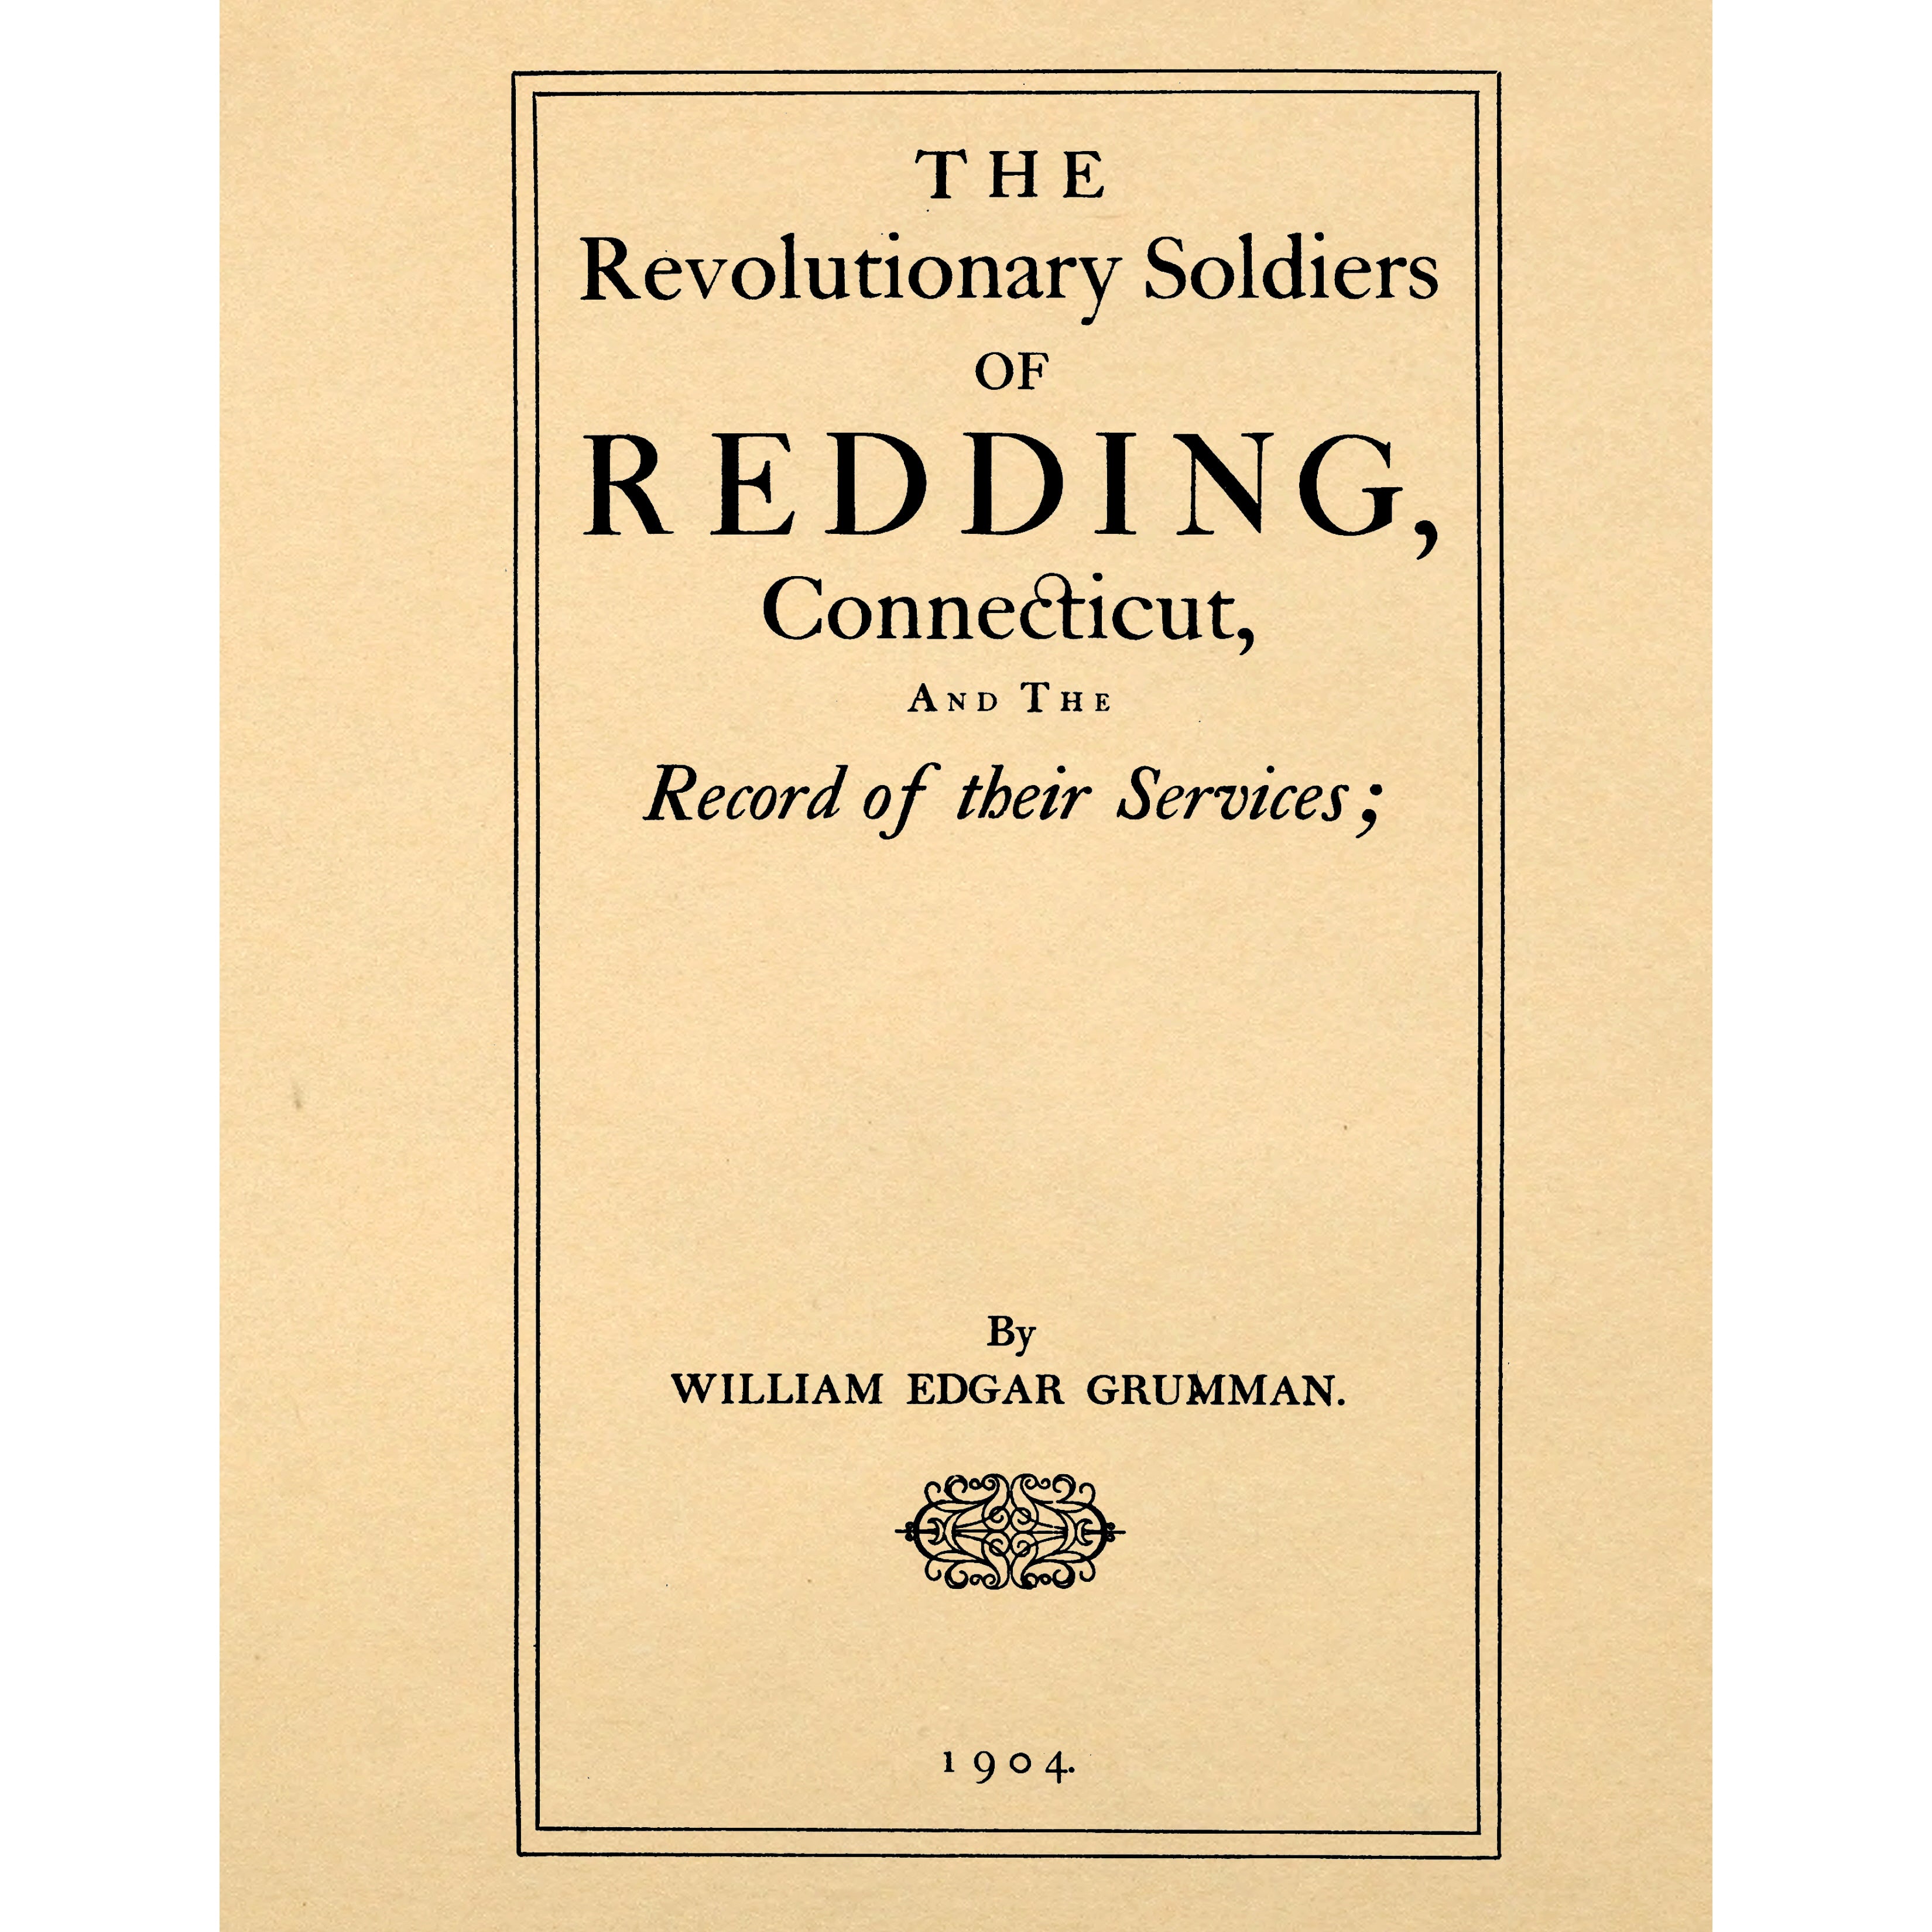 The revolutionary soldiers of Redding, Connecticut, and the record of their services